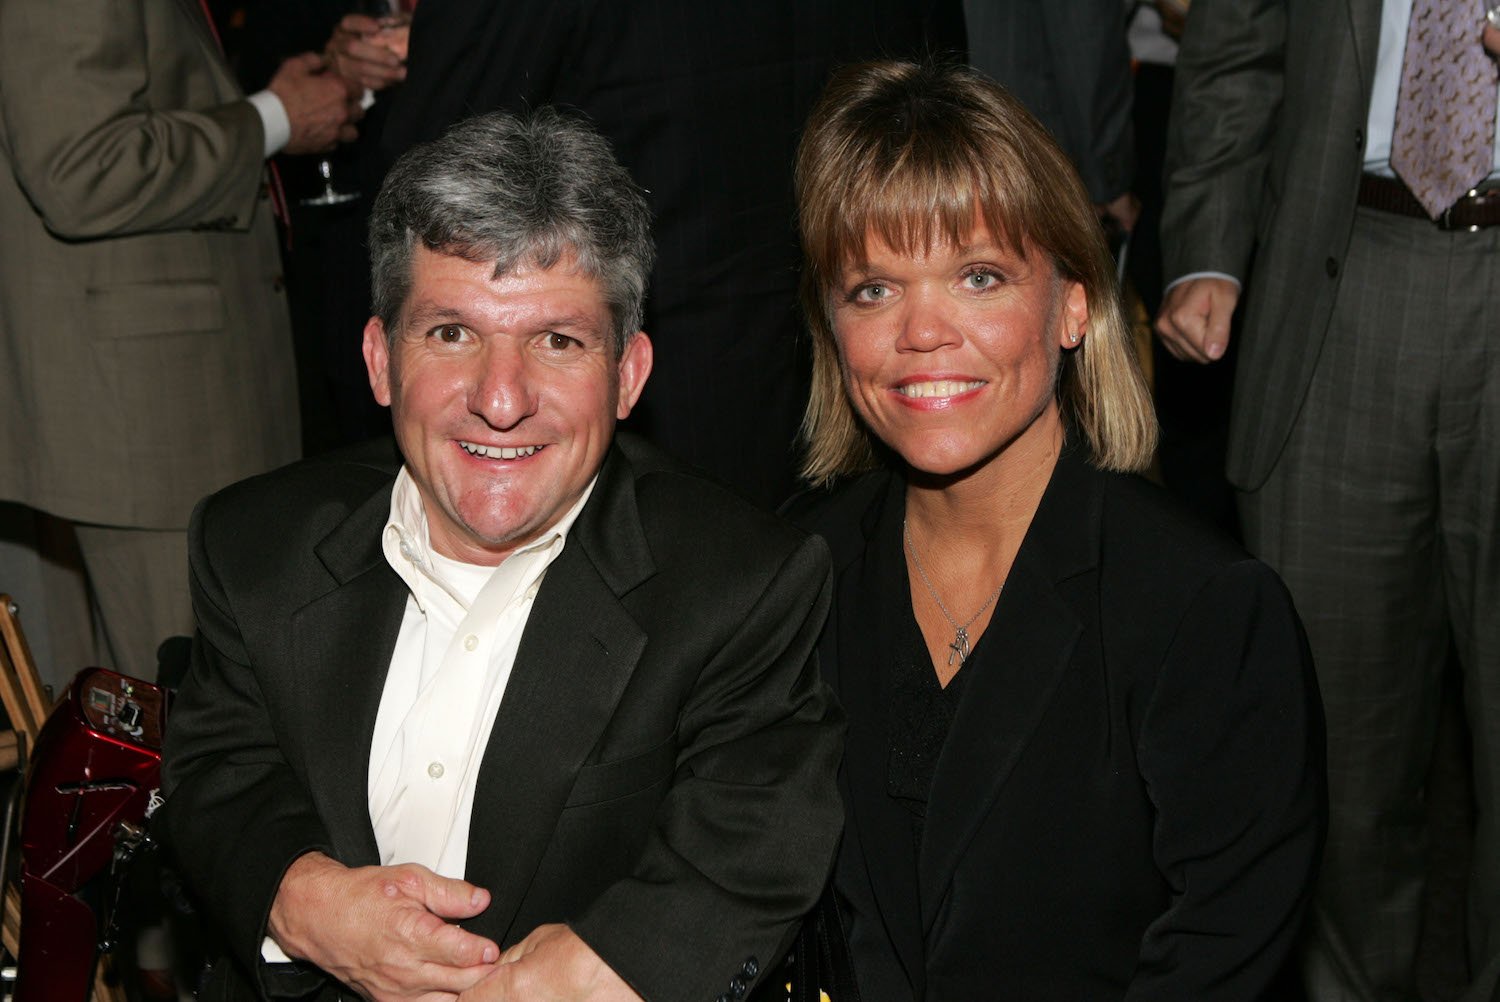 Matt and Amy Roloff from 'Little People, Big World' smiling against a black background